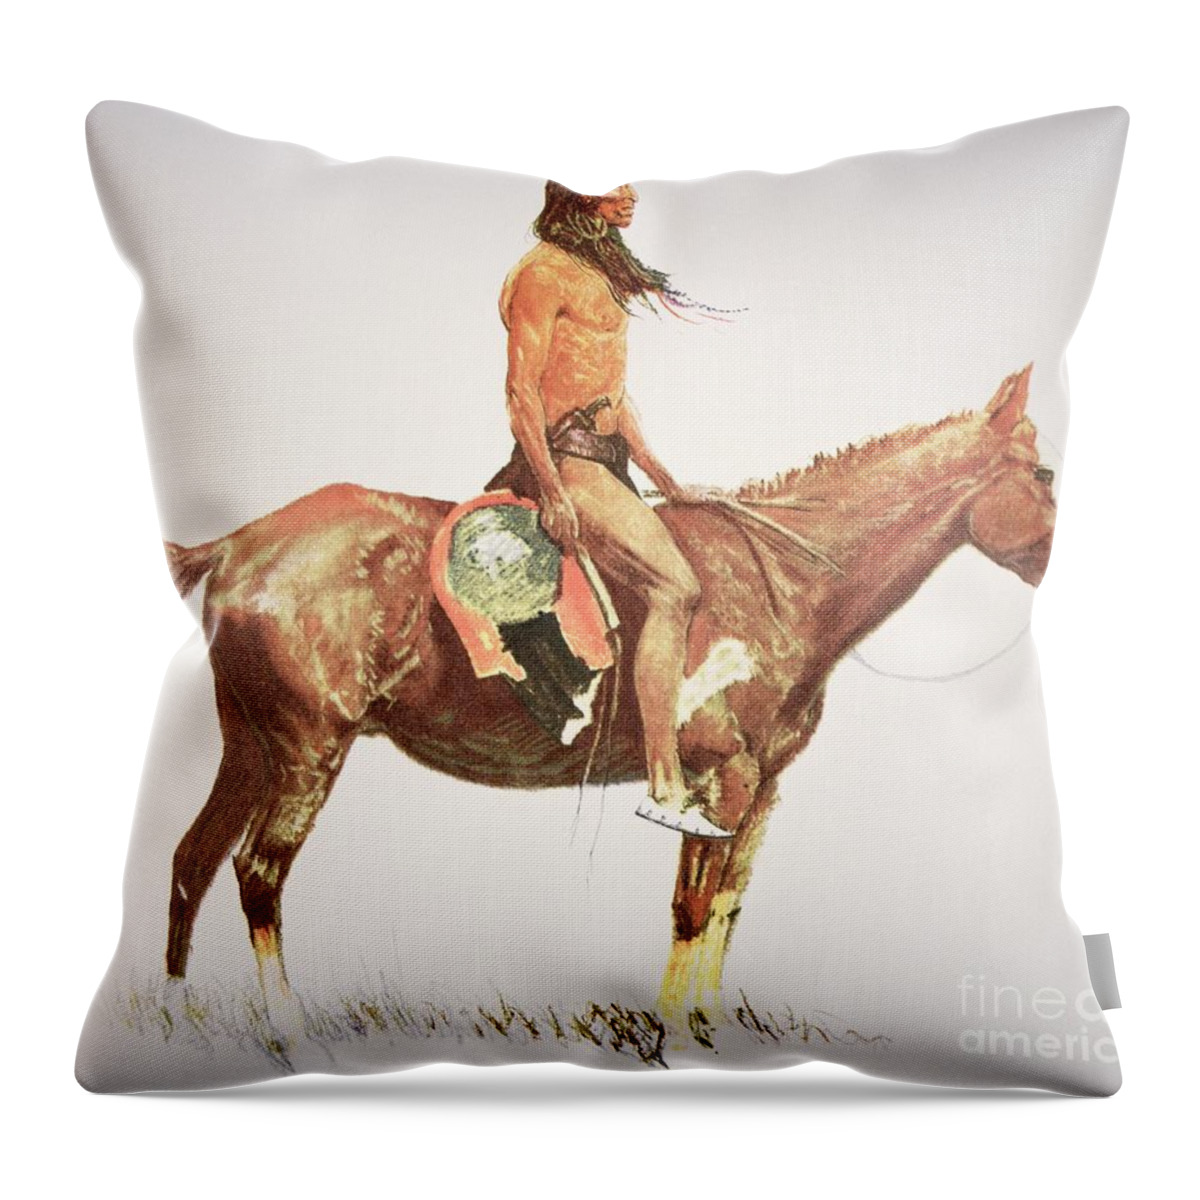 A Cheyenne Brave Throw Pillow featuring the painting A Cheyenne Brave by Frederic Remington